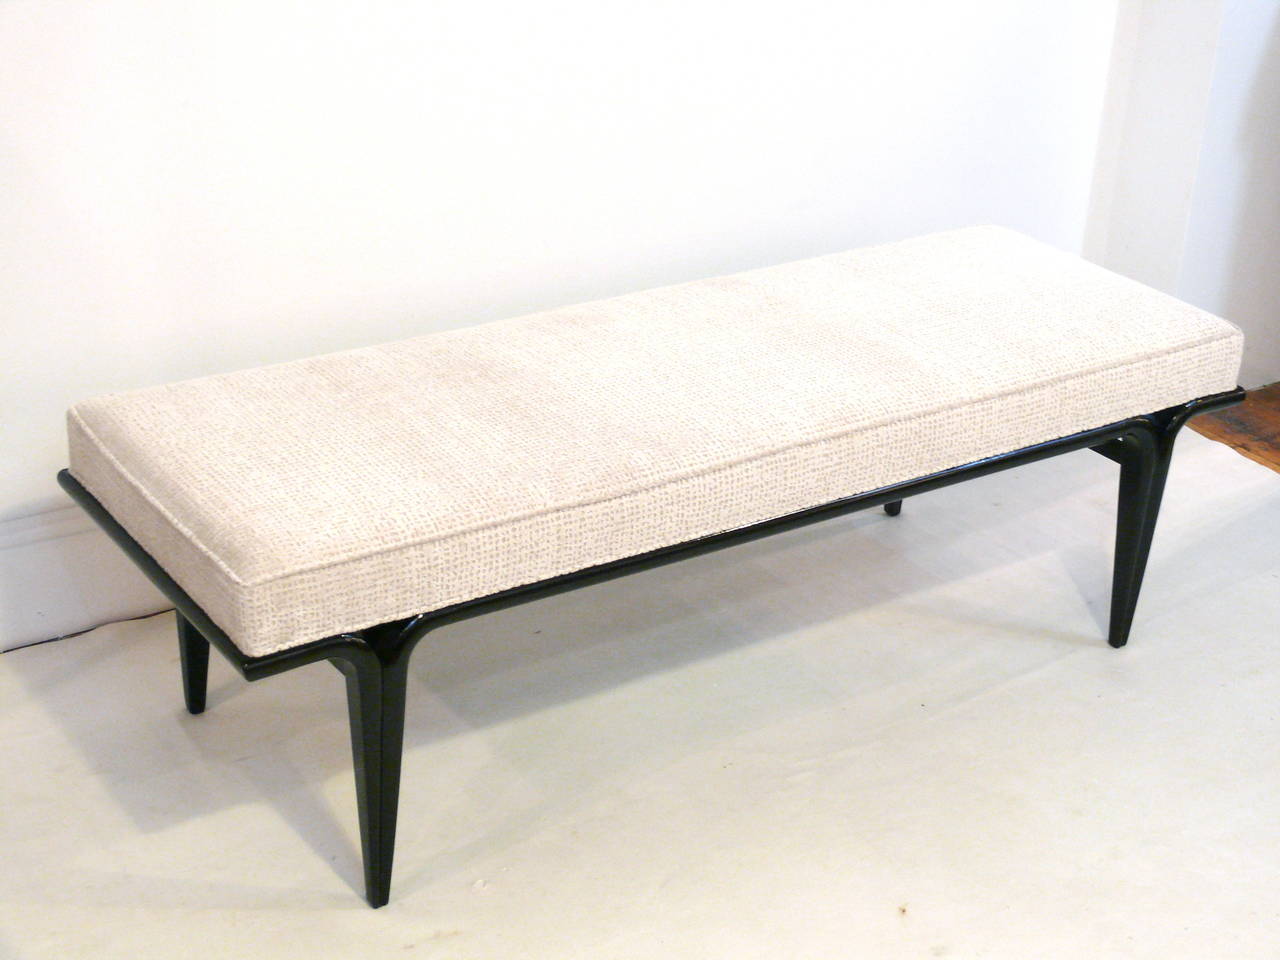 Stunning mid-century bench in the manner of T.H. Robsjohn-Gibbings with a high gloss ebonized walnut base, beautiful tapered legs, and reupholstered in a rich grid texture beige chenille.